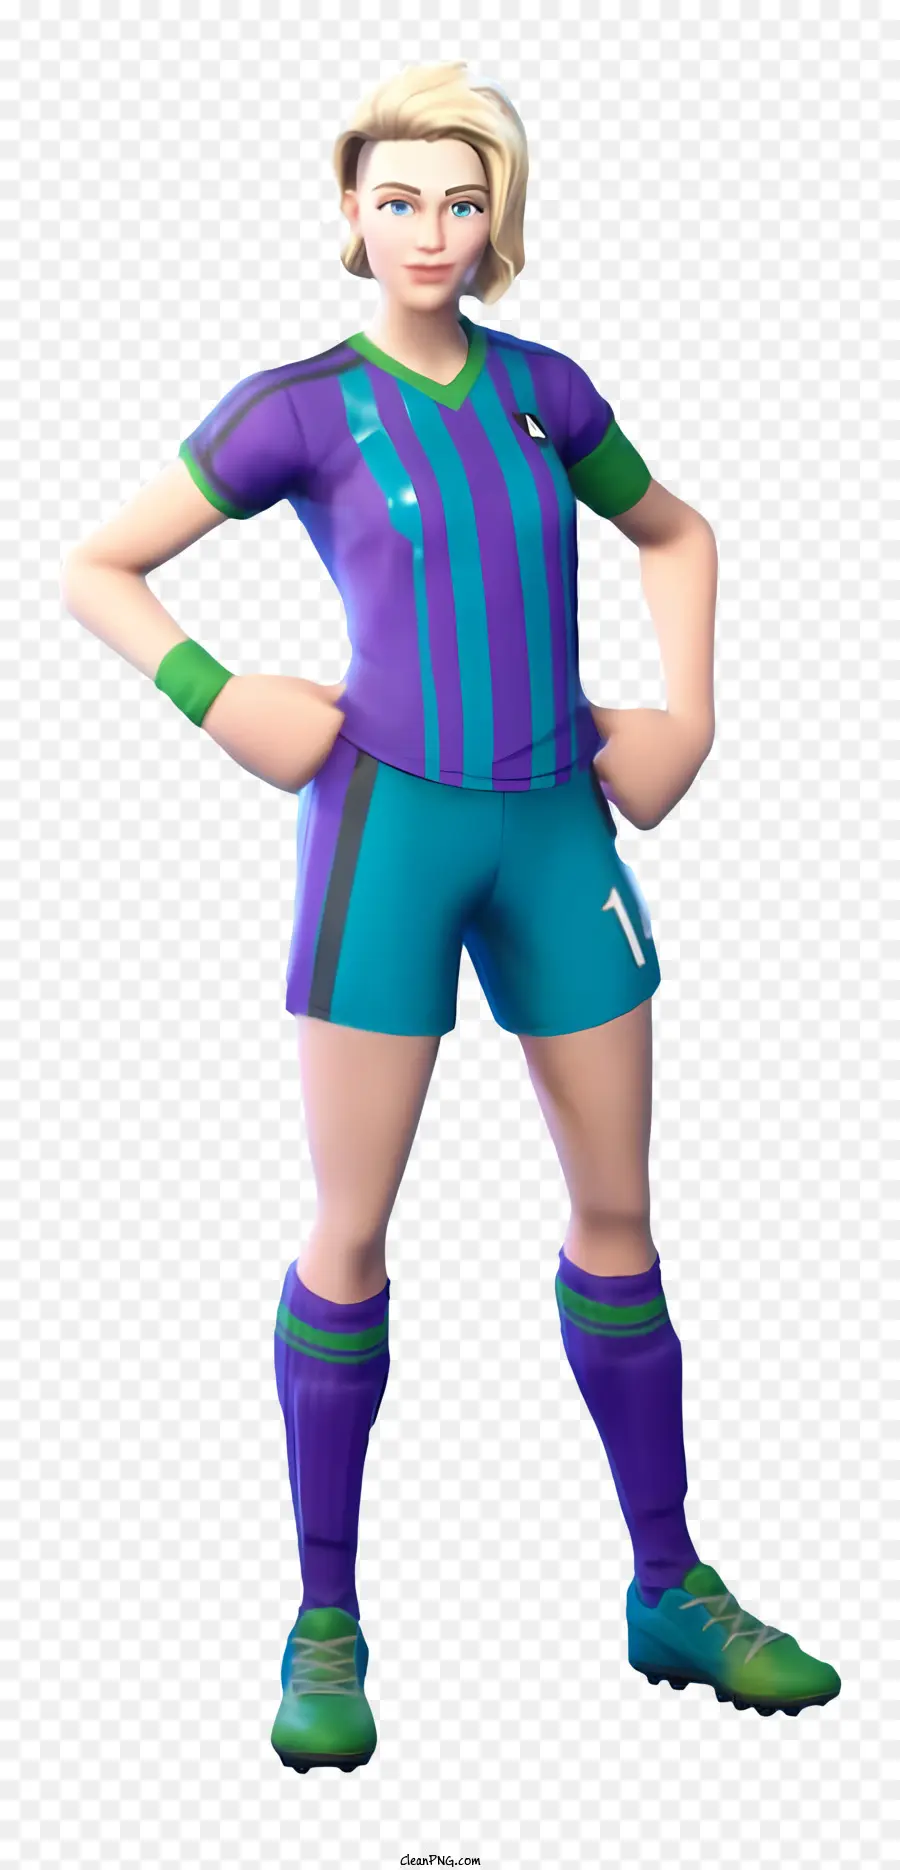 fortnite football skin blue and purple jersey yellow strip number 7 player